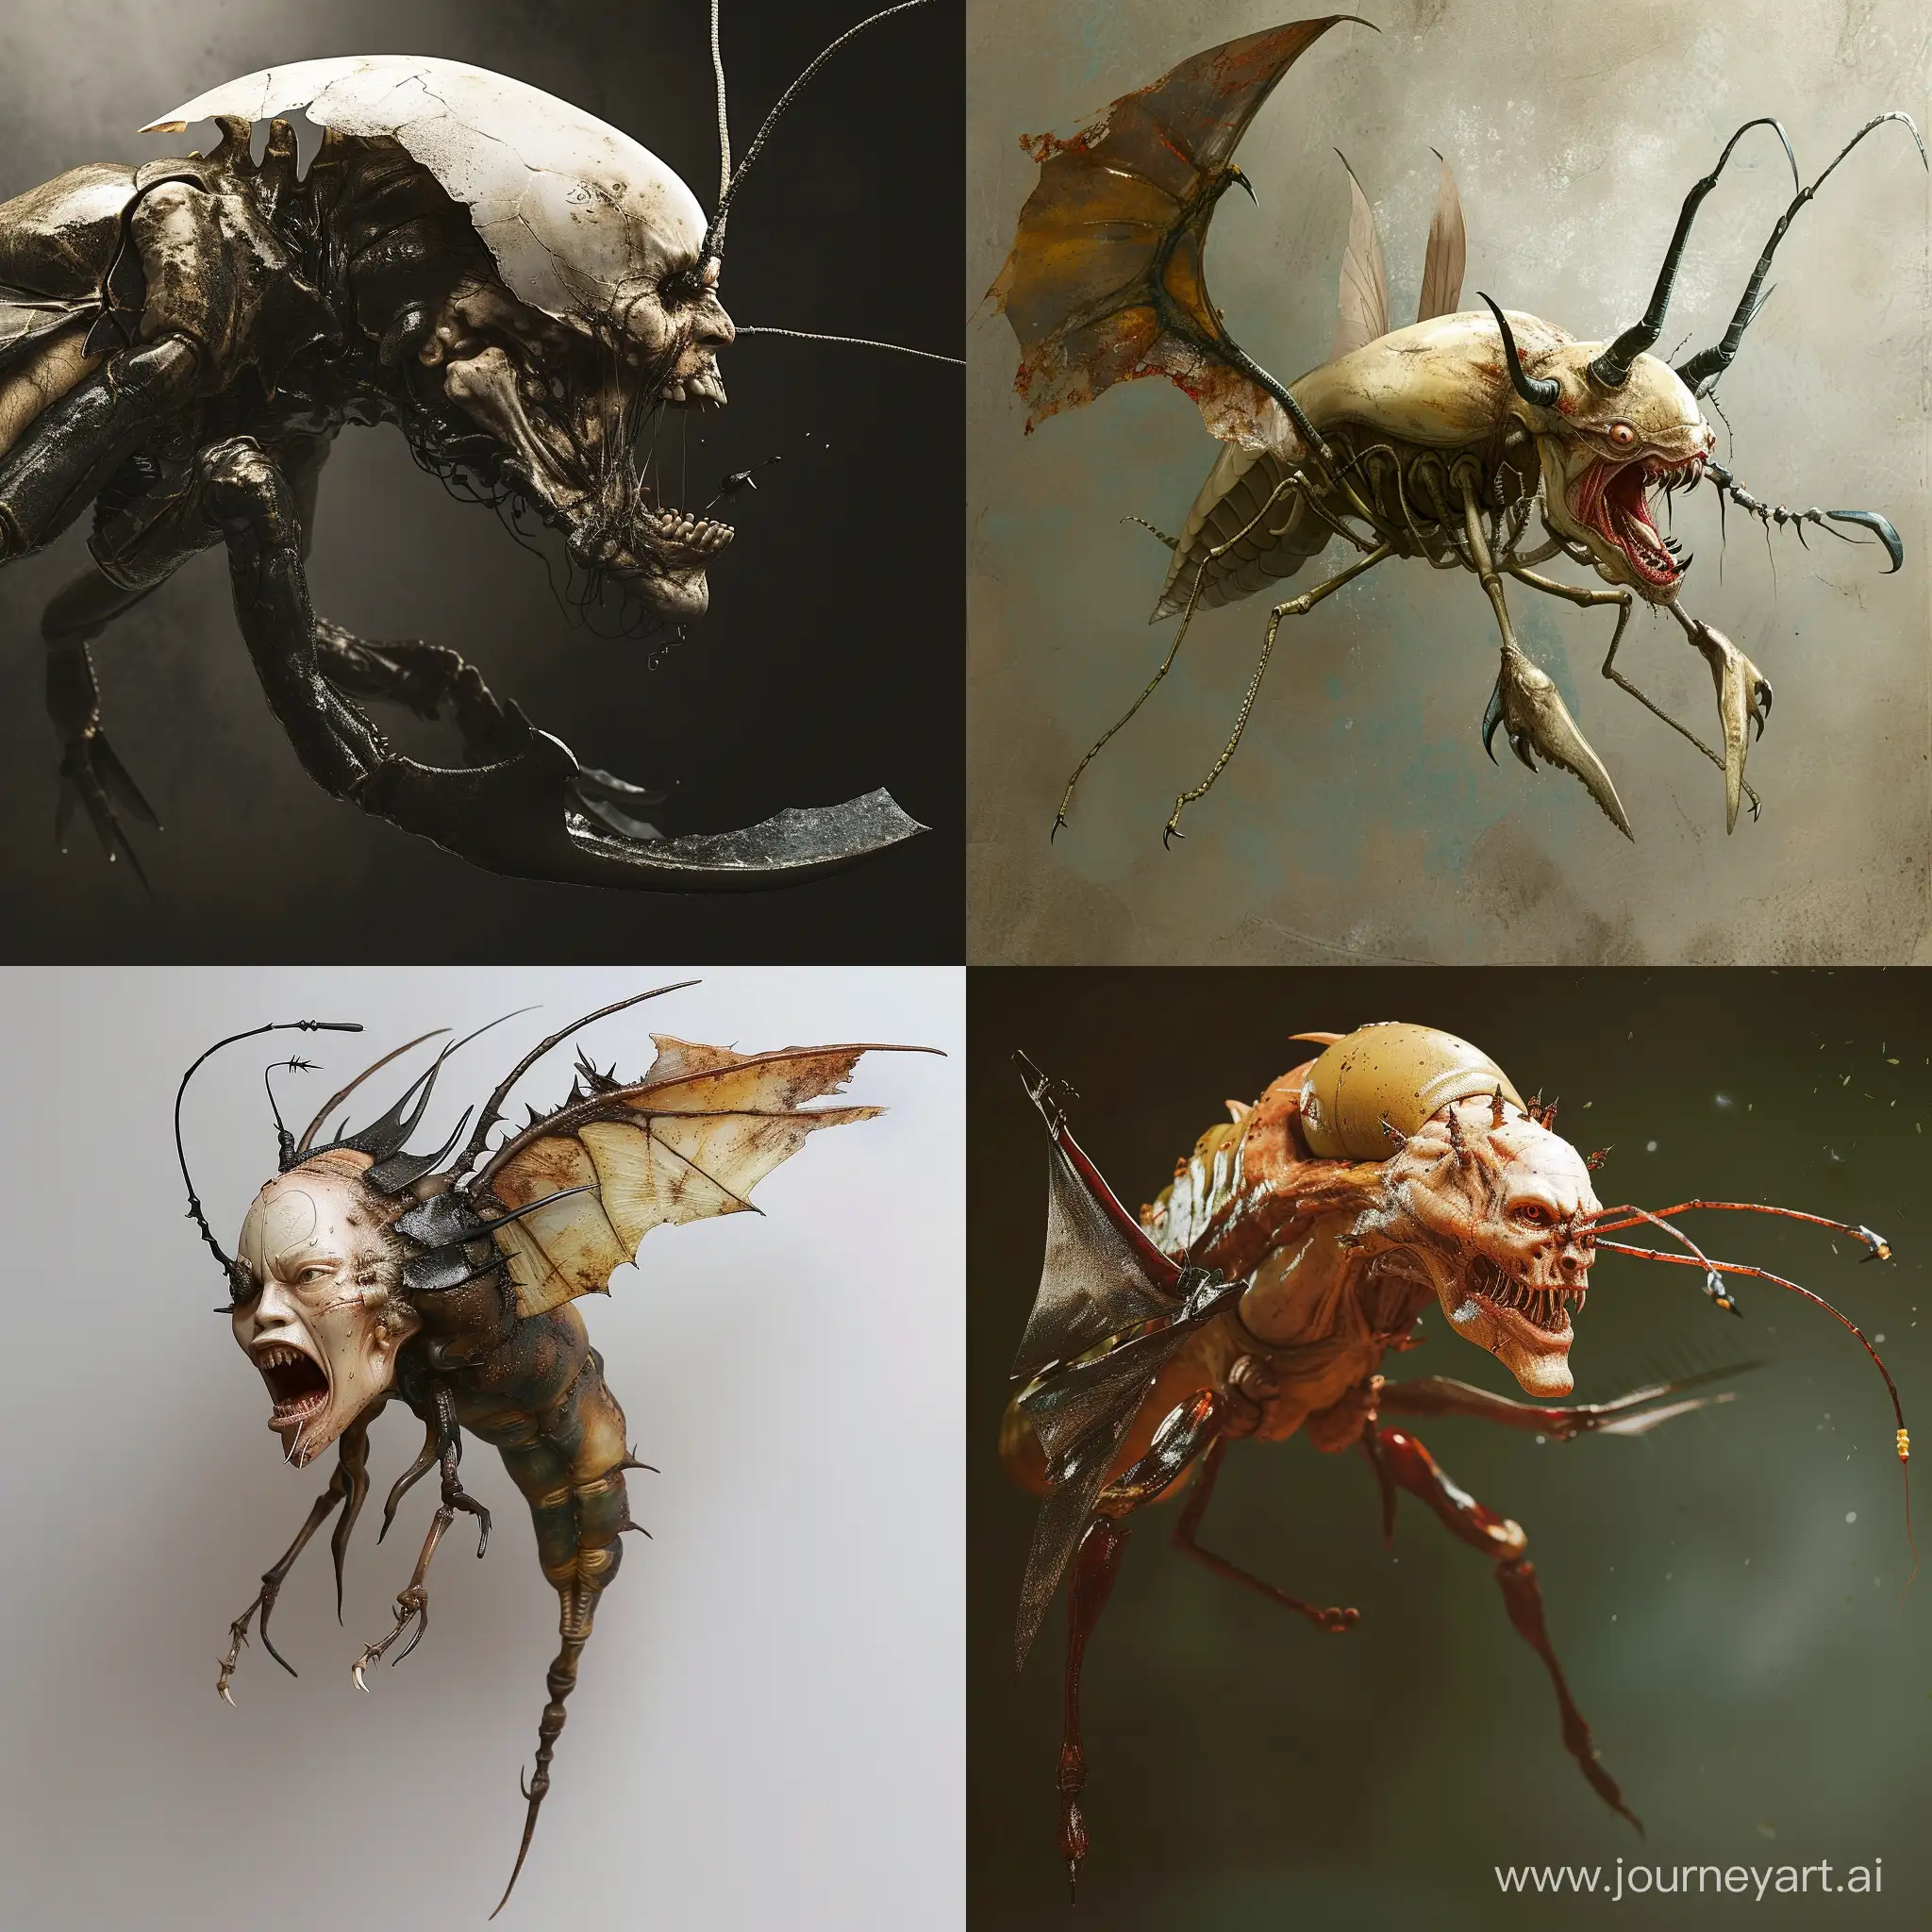 Sinister-Arthropod-Monster-with-Batlike-Wings-and-Splitting-Jaw